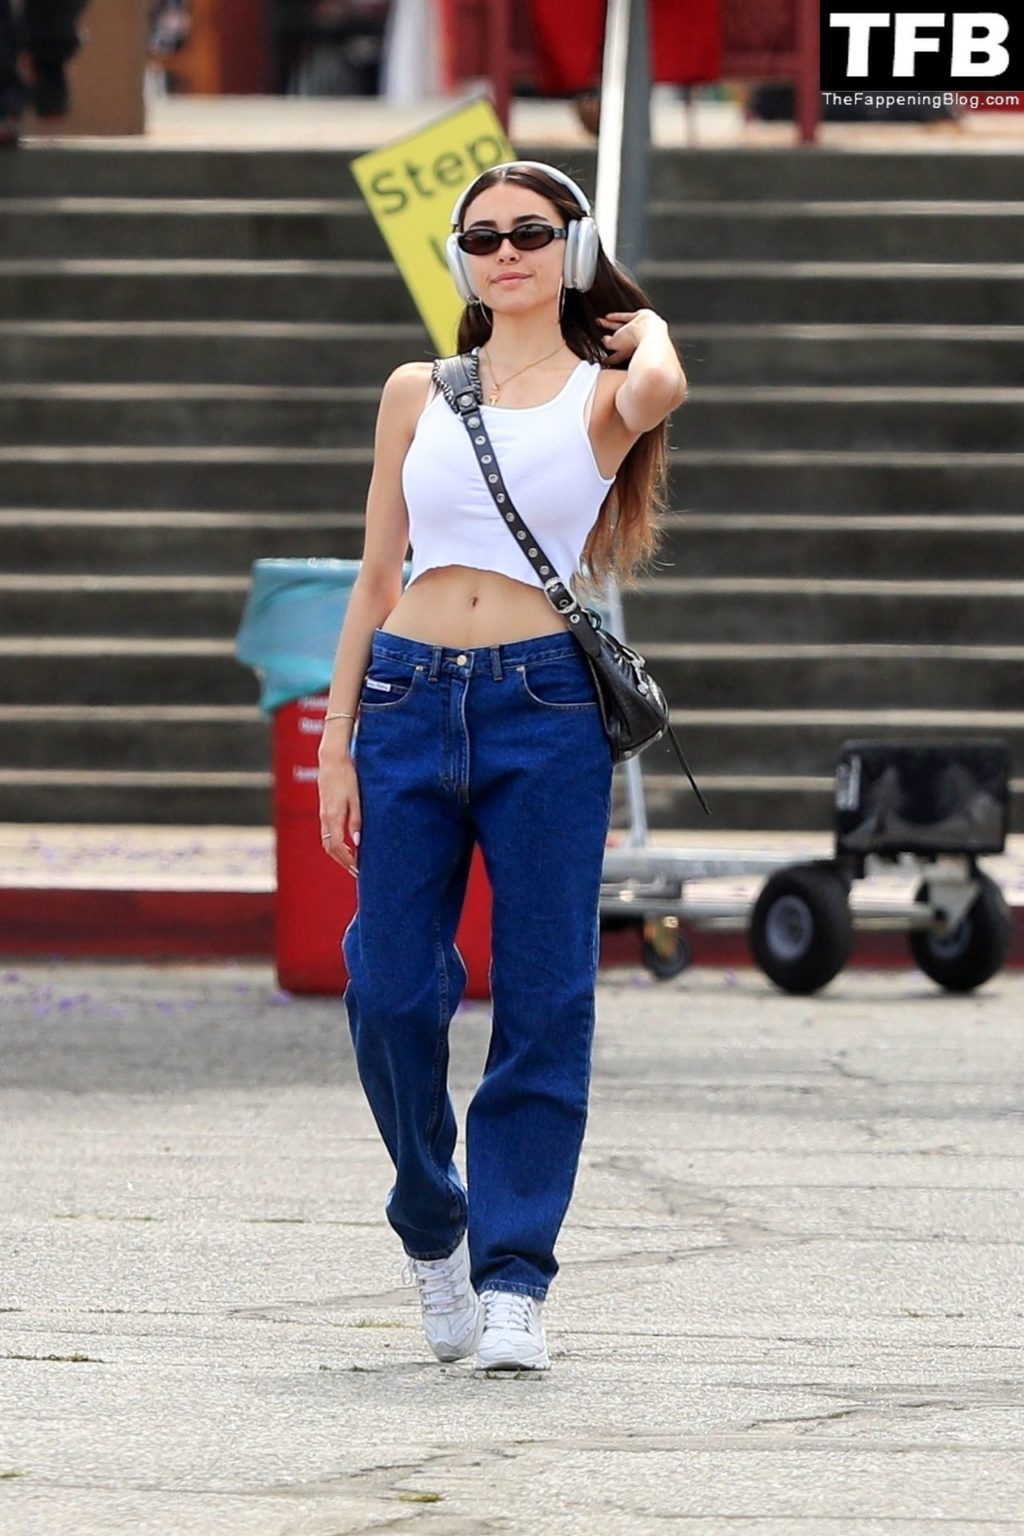 Madison Beer Sexy The Fappening Blog 17 1024x1536 - Madison Beer Wears a Tiny Crop Top Revealing a Toned Waist While Shopping in LA (39 Photos)